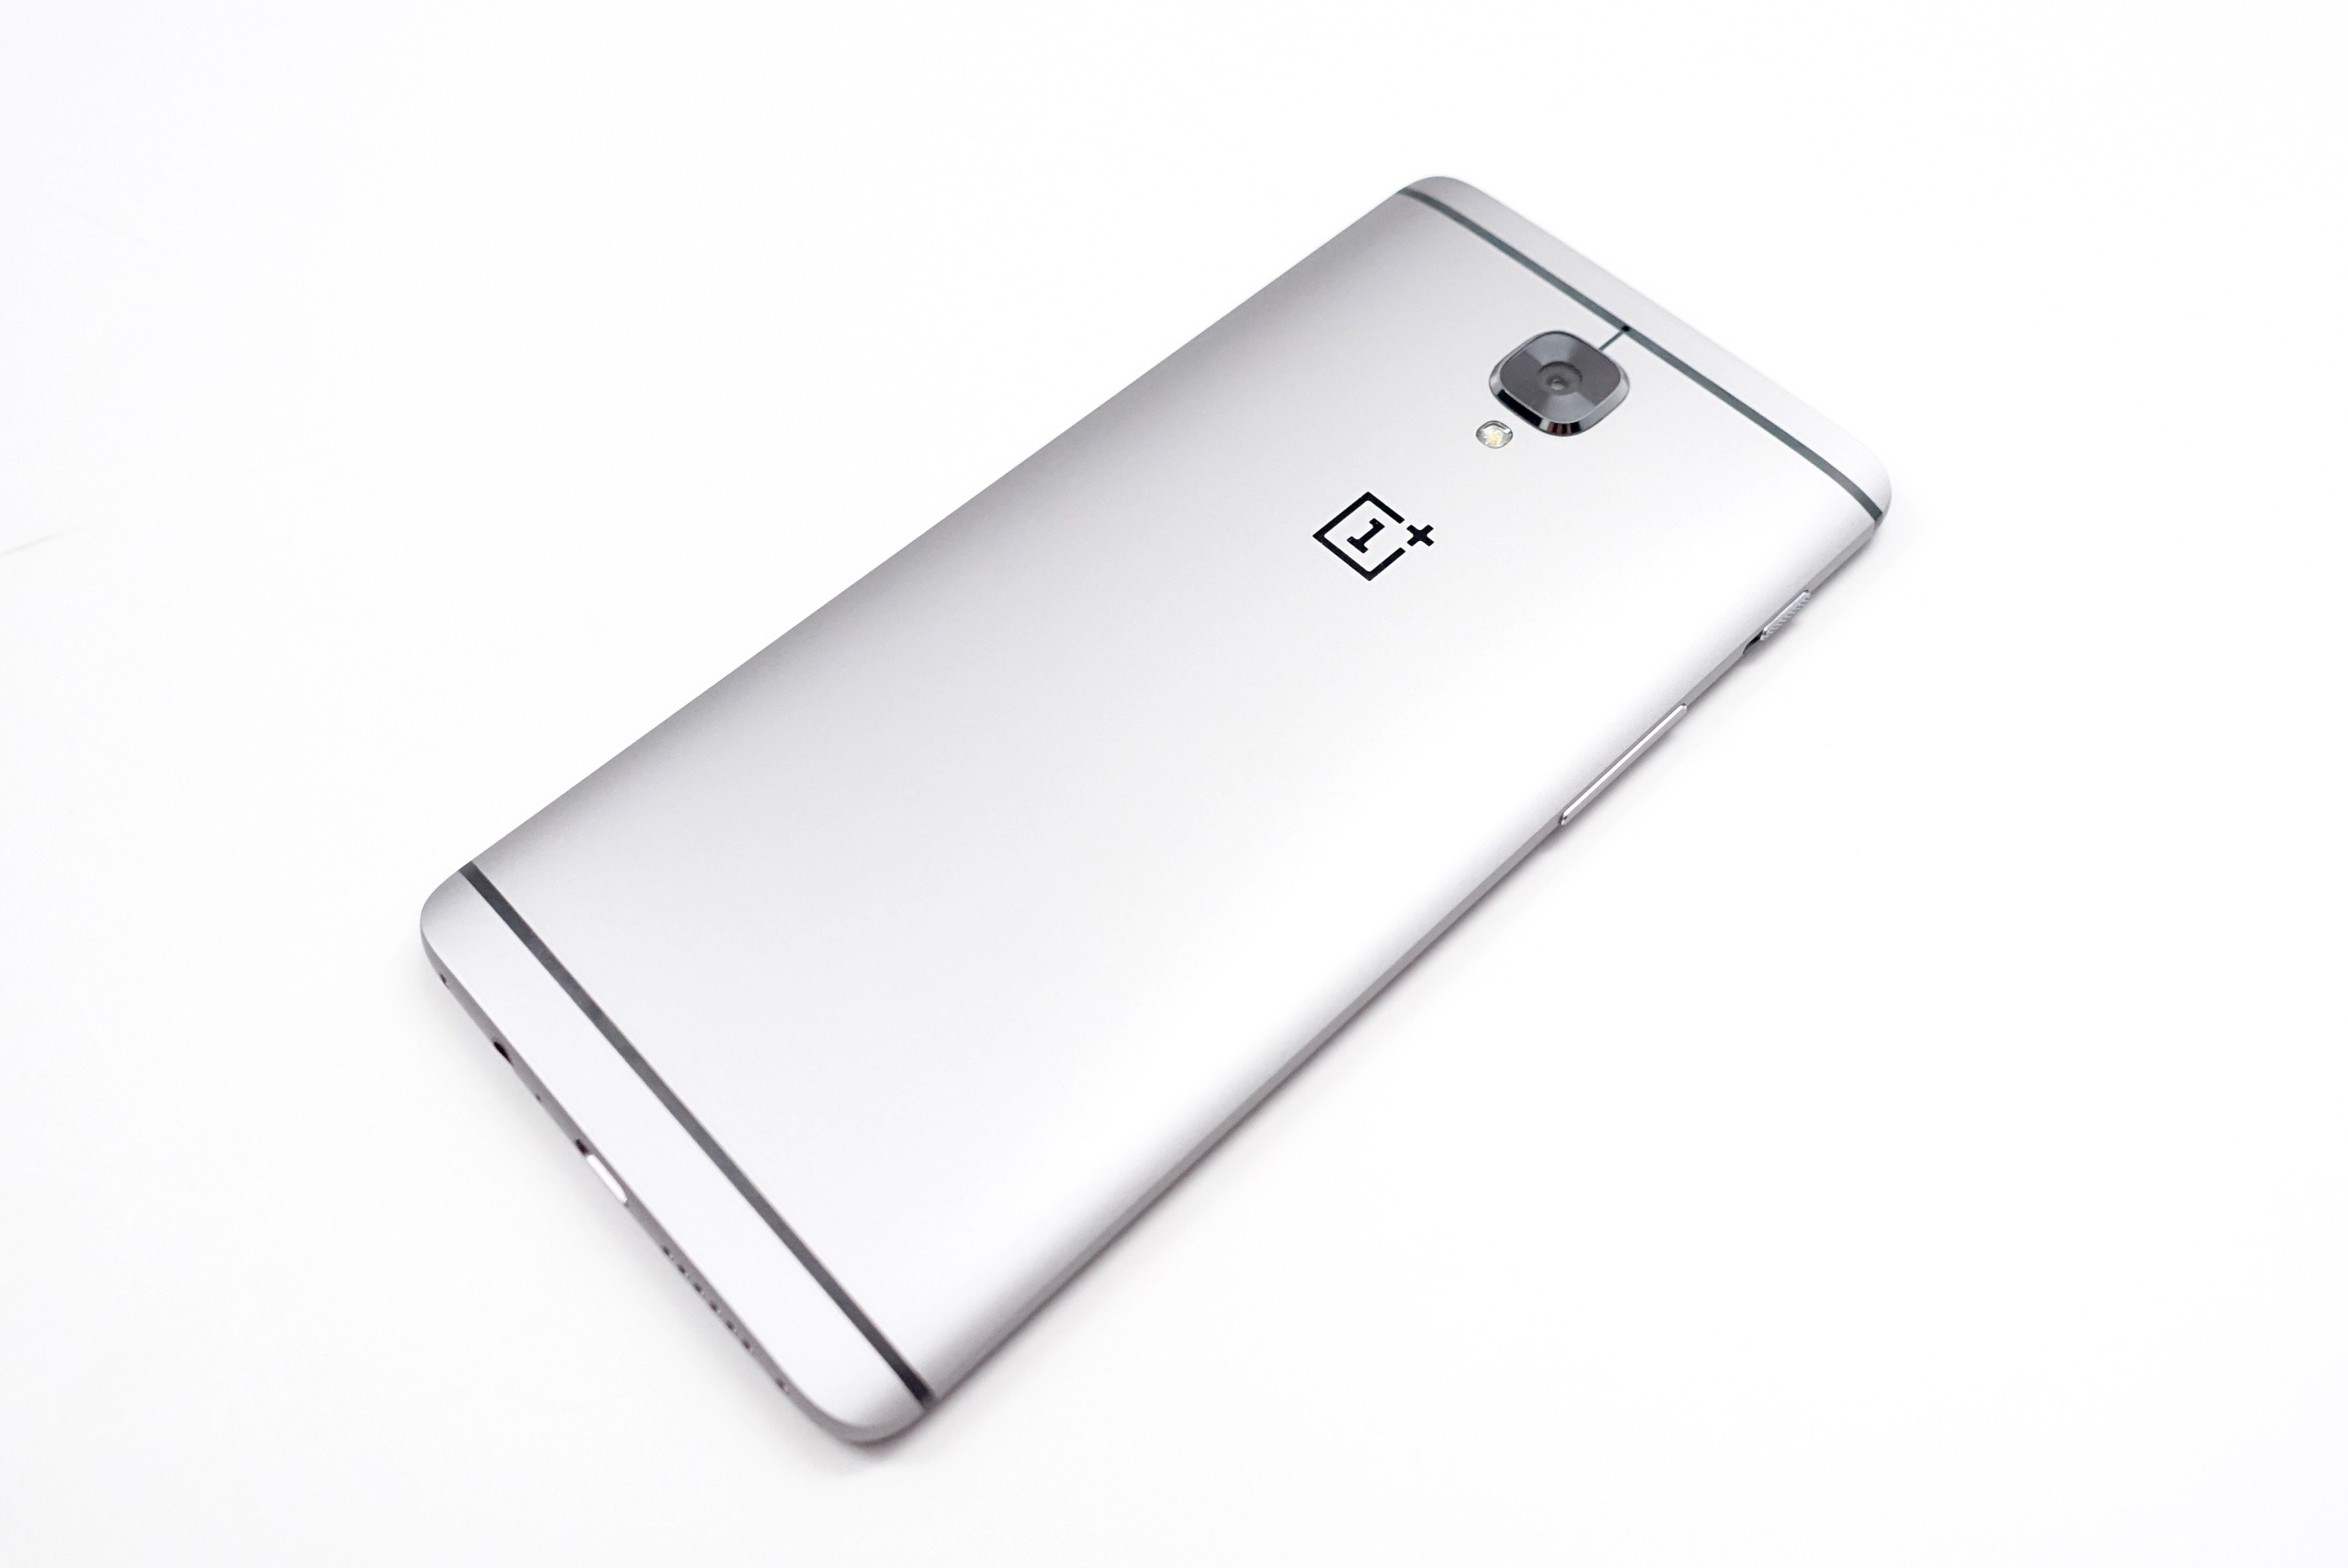 Everything you need to know about the OnePlus 3 -- an amazing $399 smartphone.